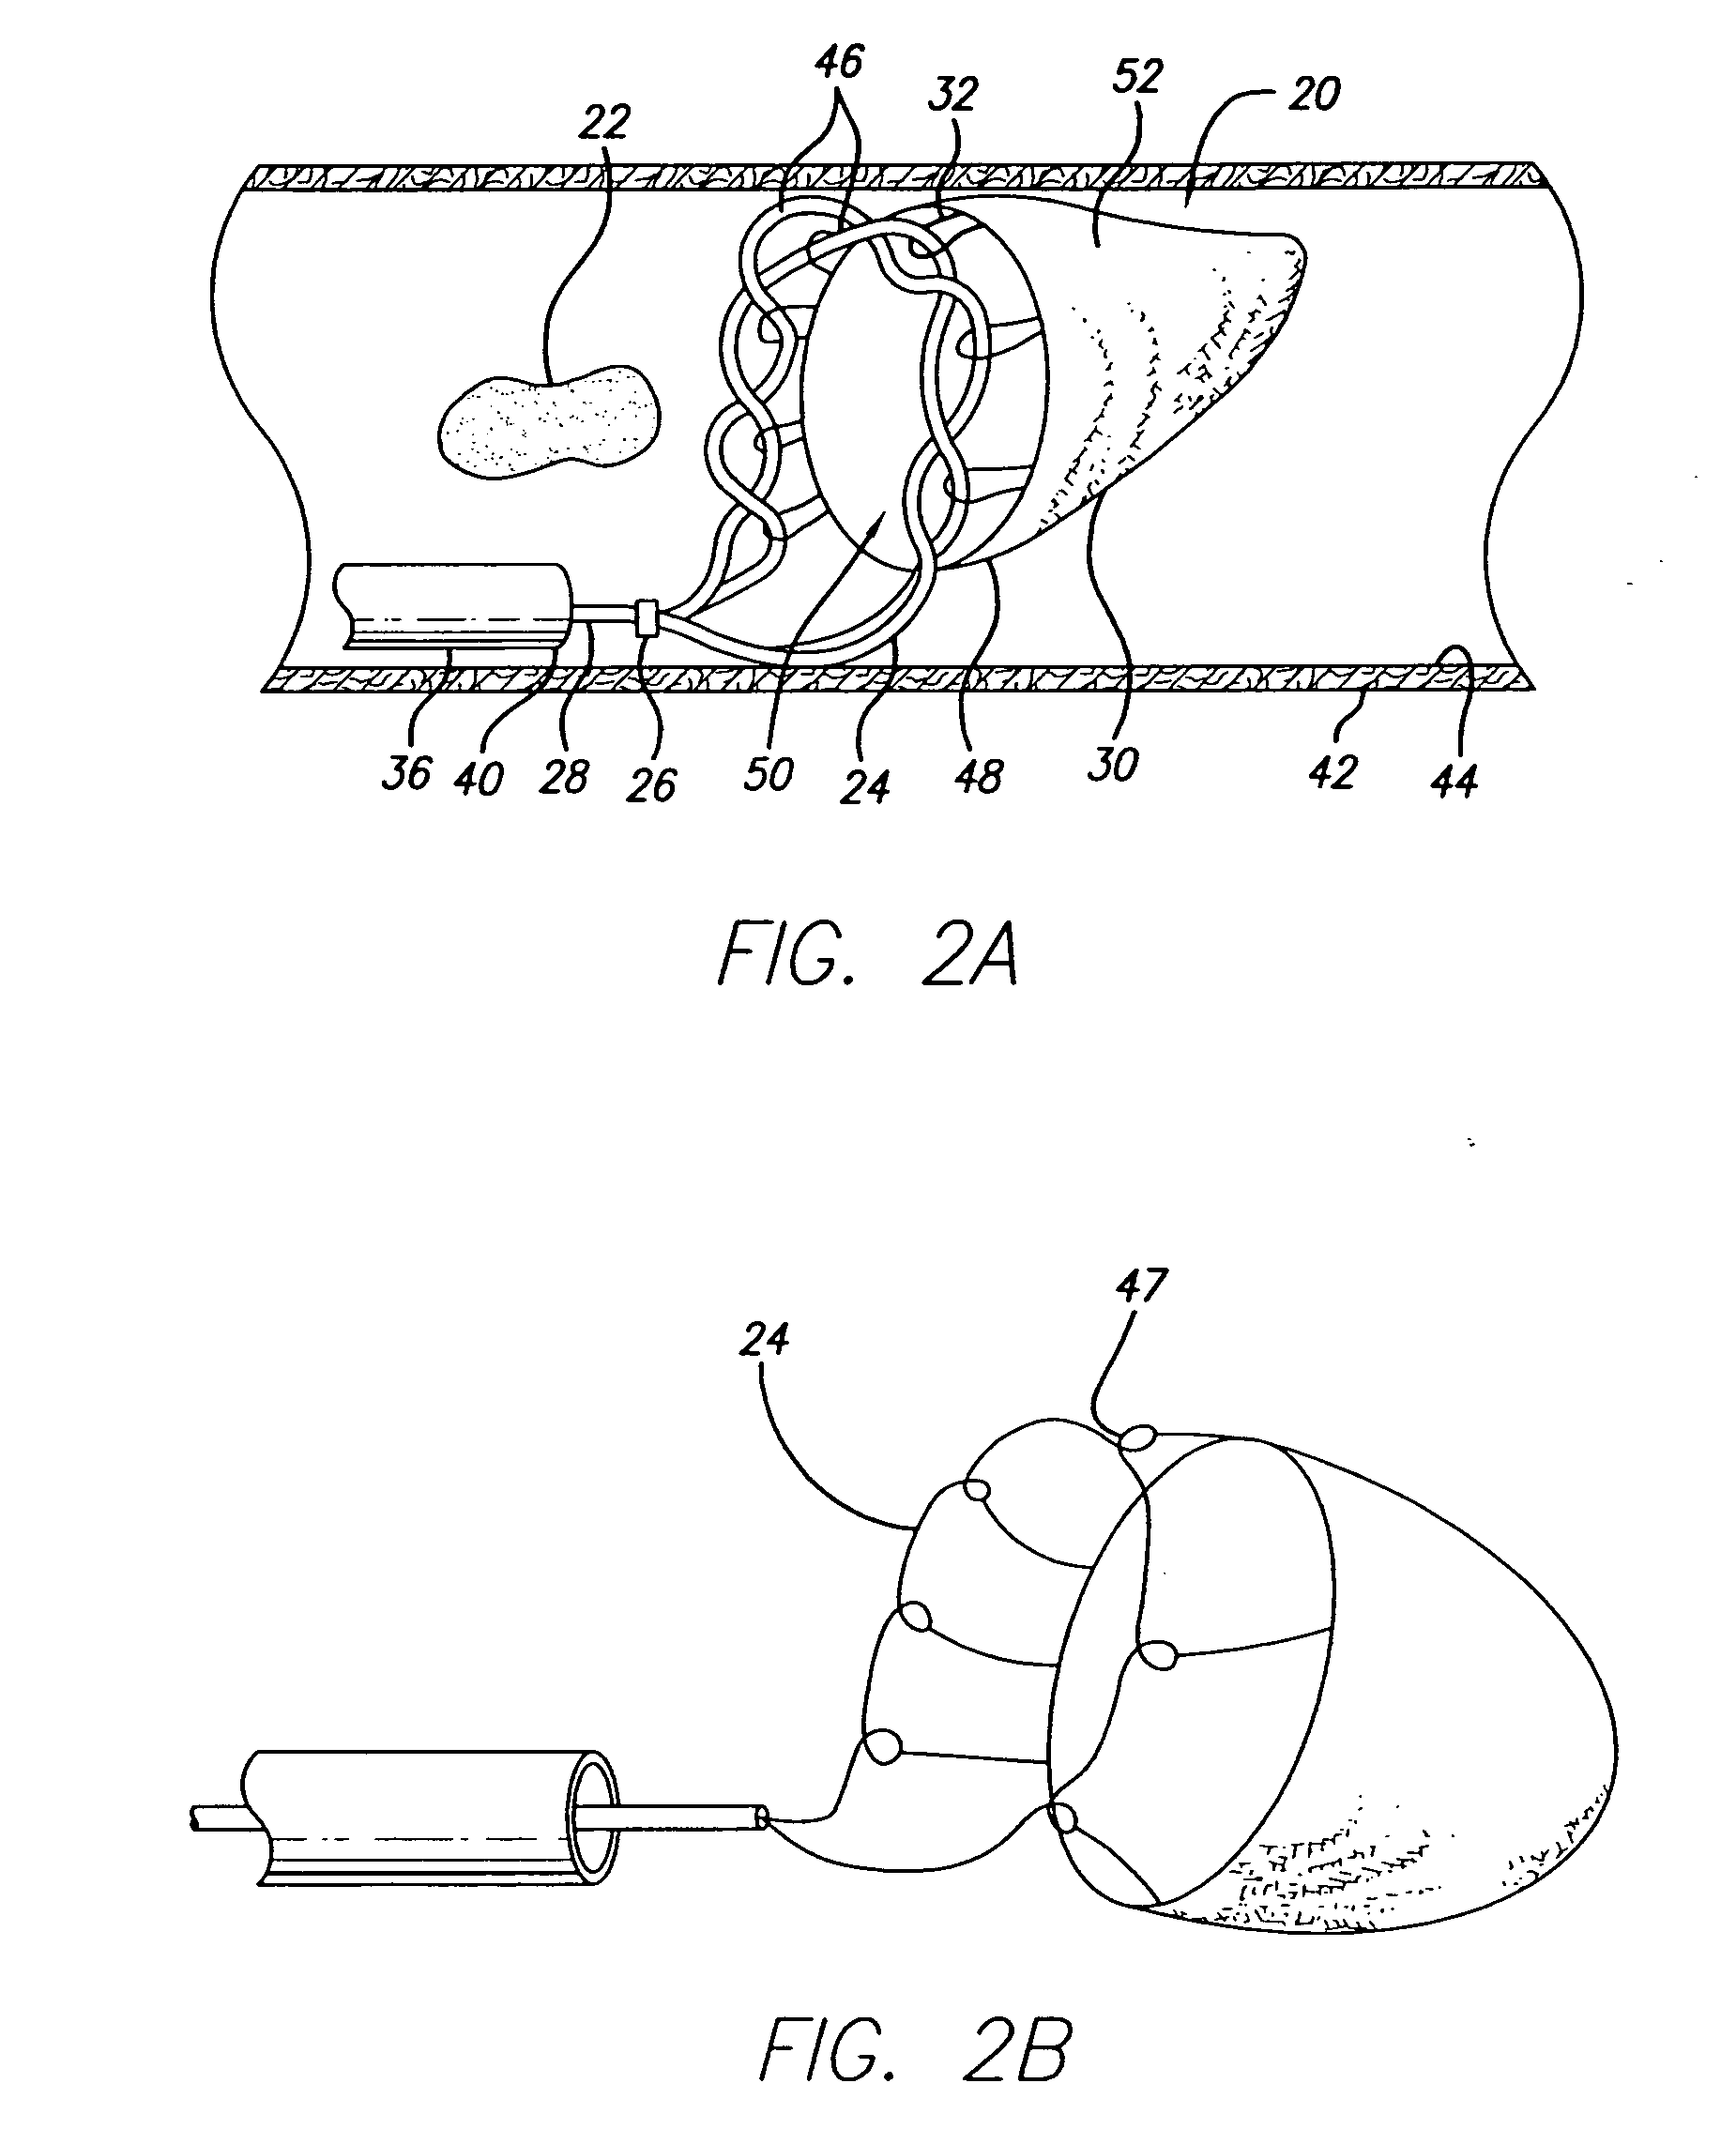 Expandable emboli filter and thrombectomy device